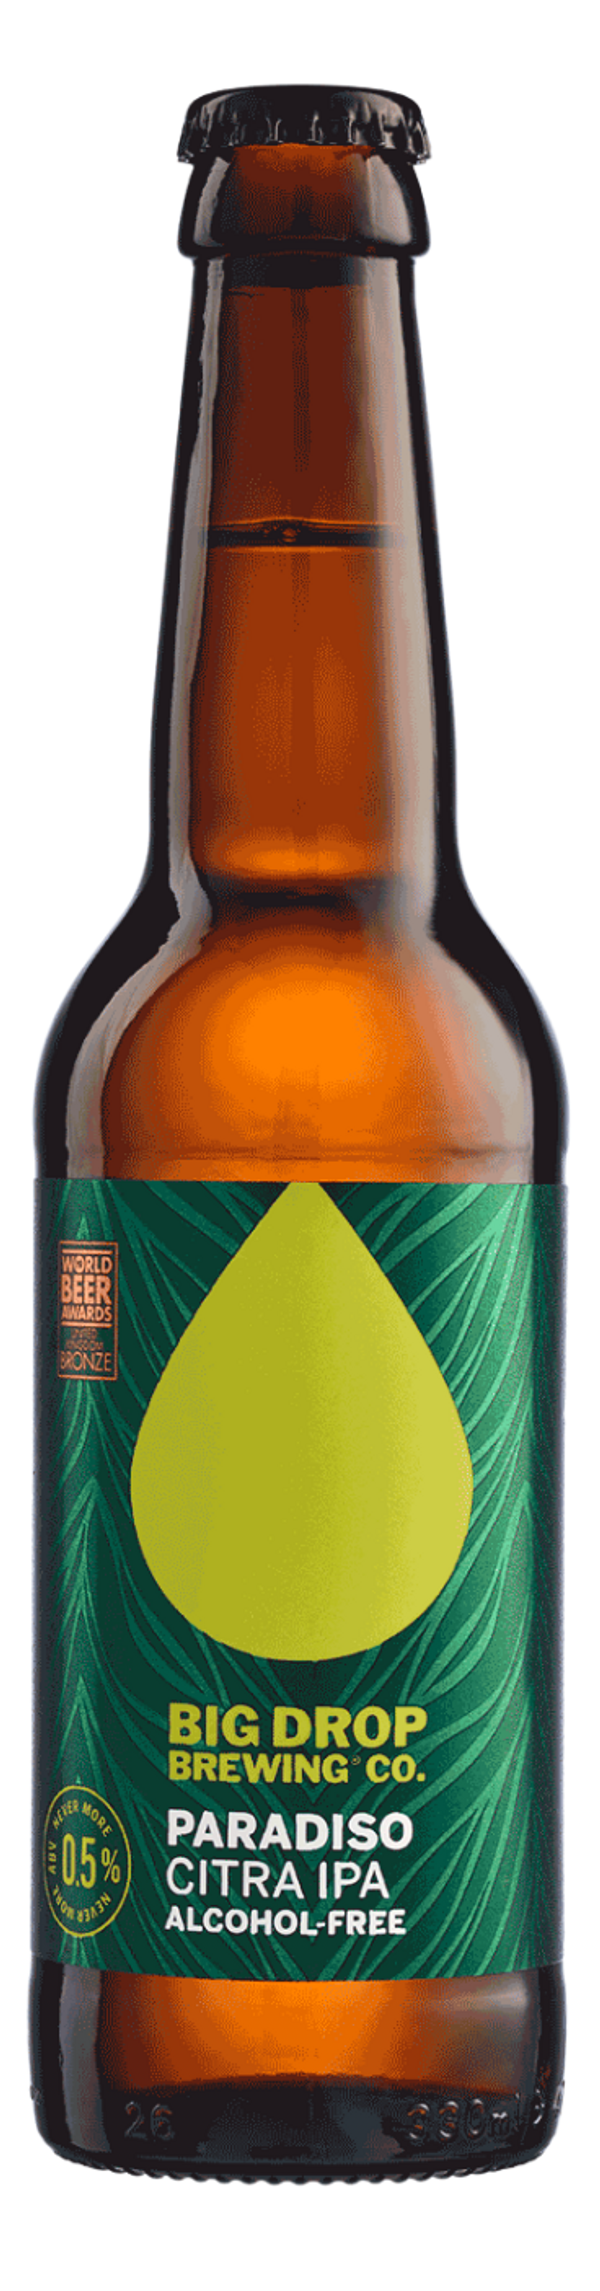 A pack image of Big Drop's Paradiso Bottles - Shortdated Citra IPA